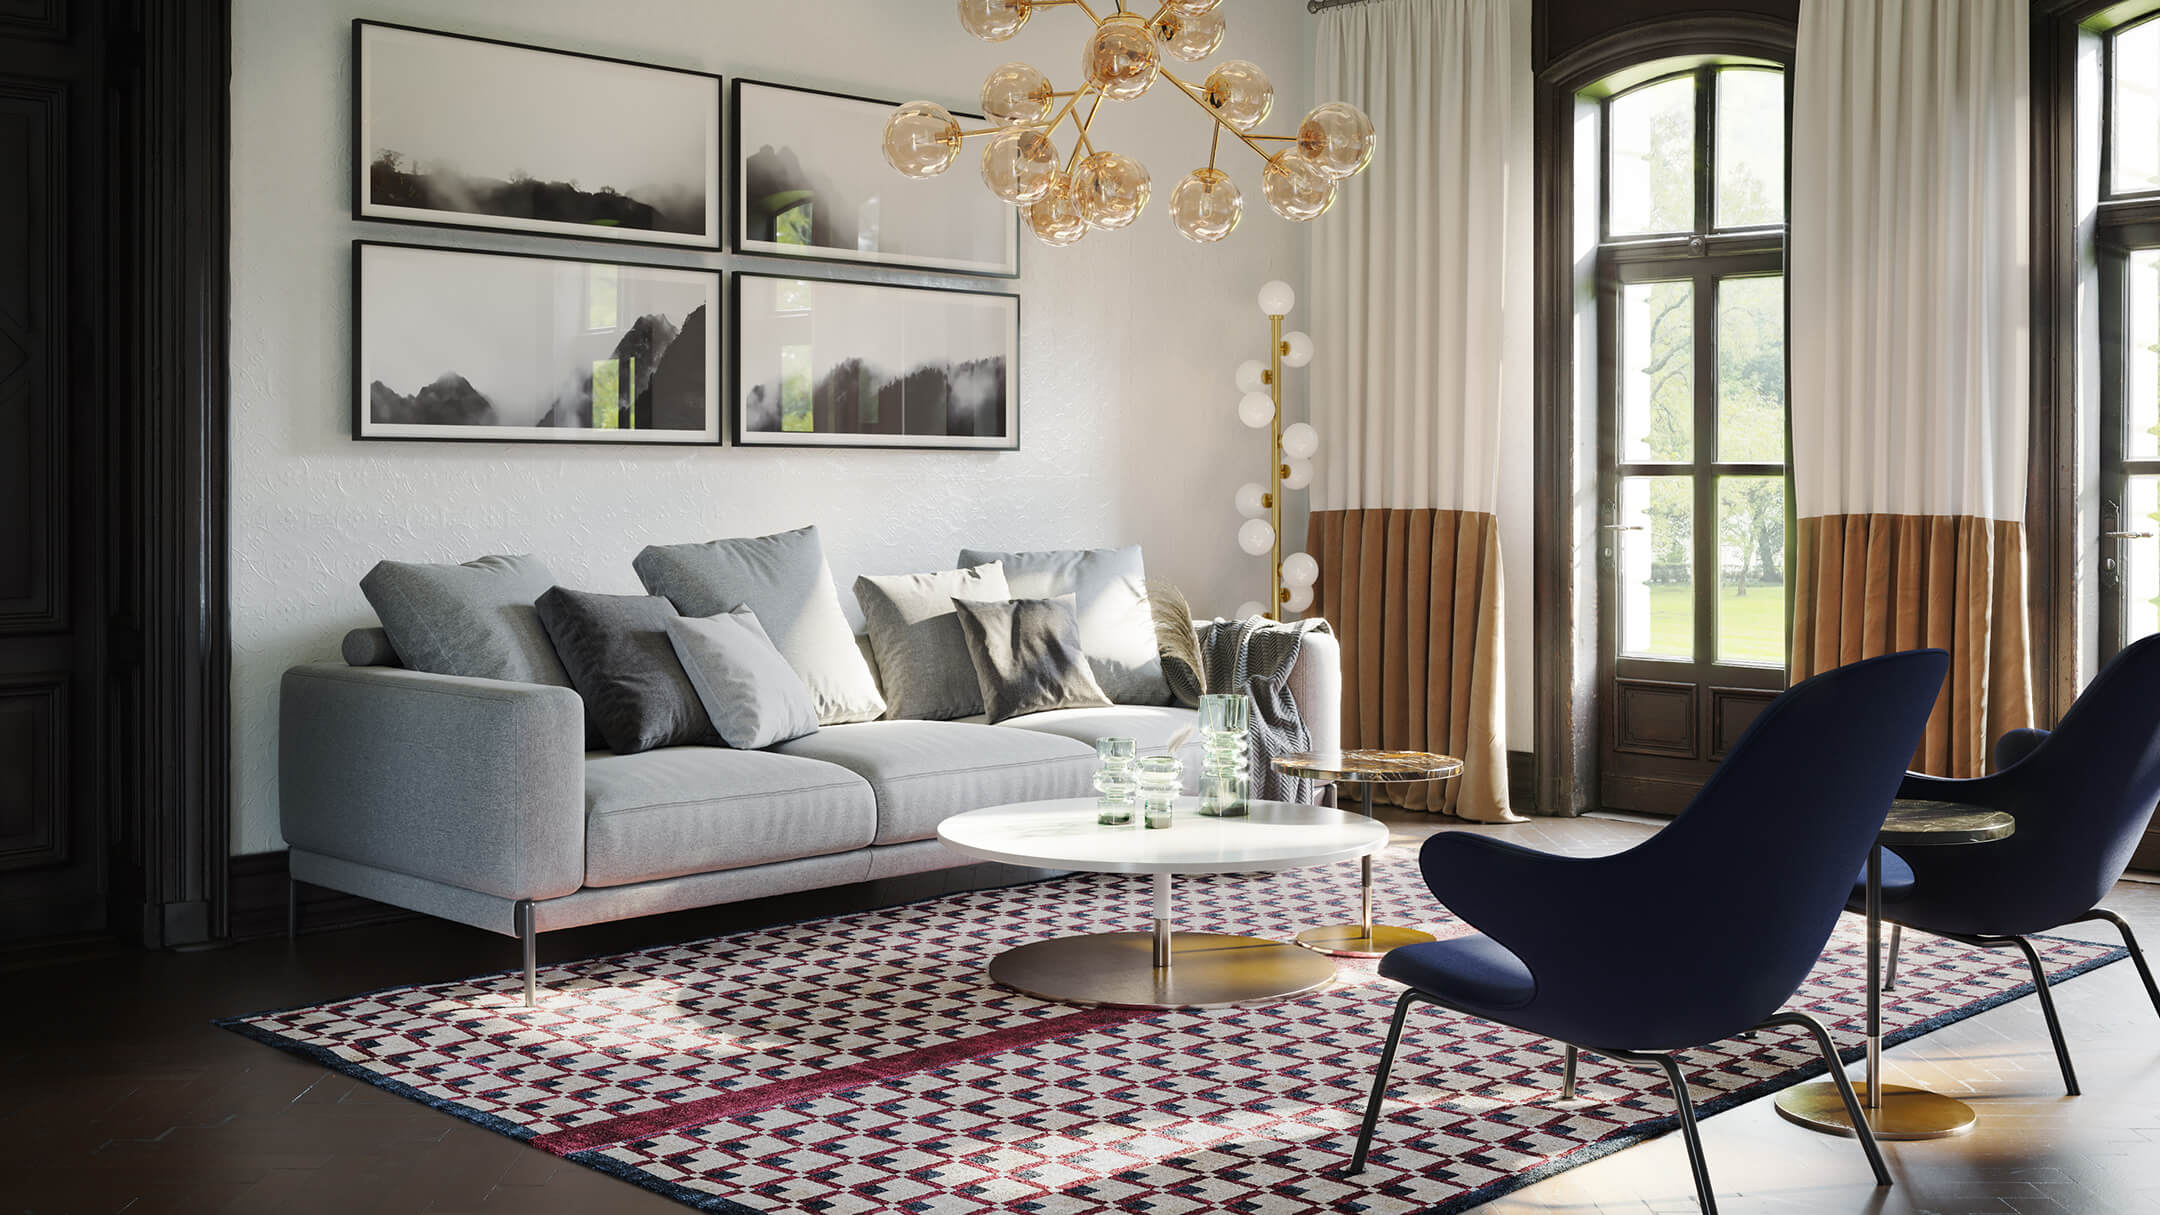 What's Your Interior Design Style: A Guide to the Top Styles